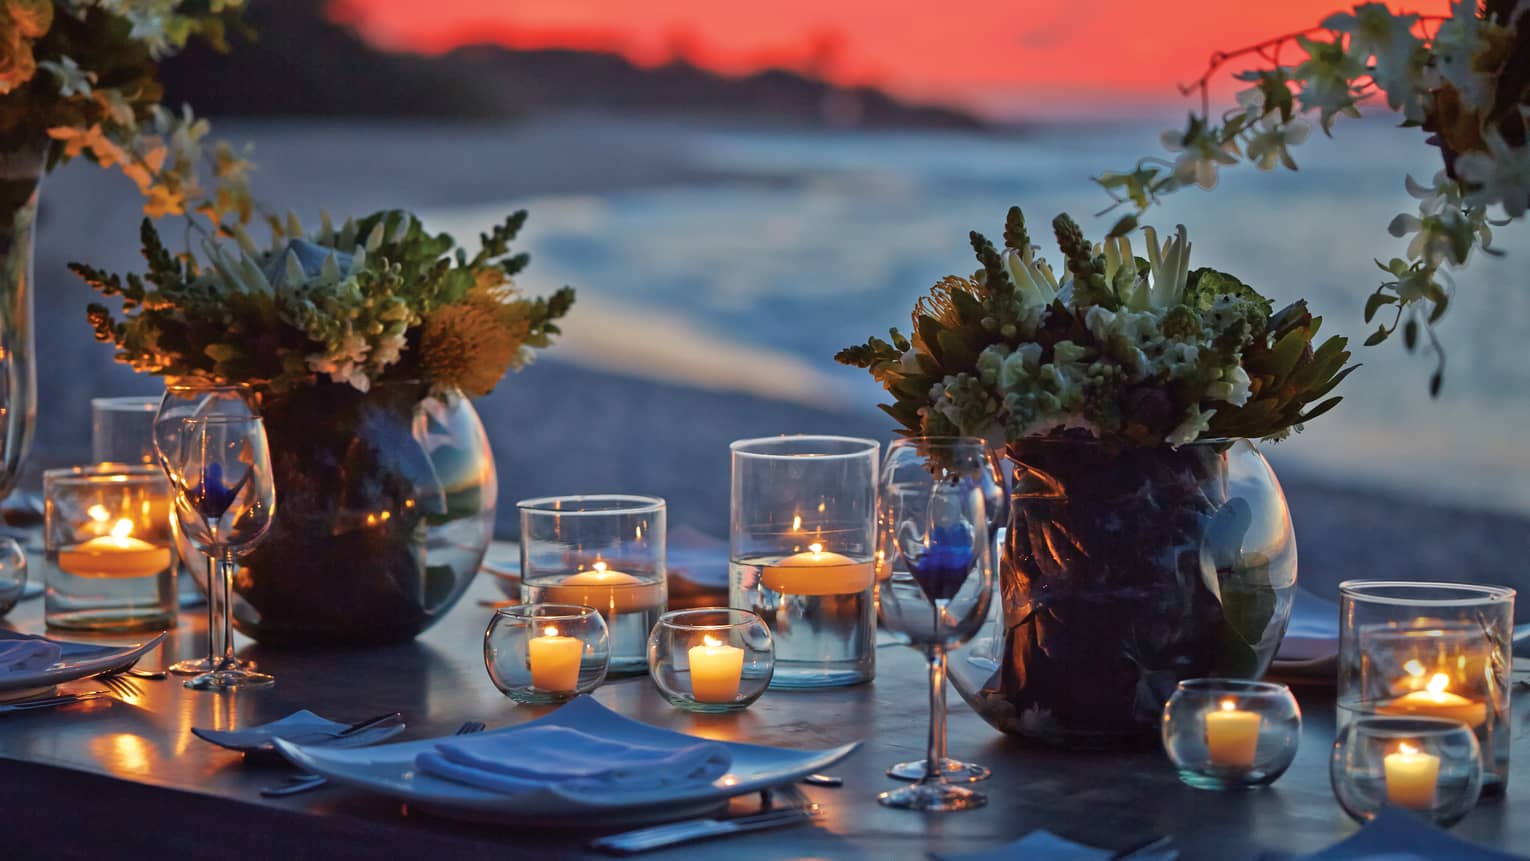 Large round vases of flowers and many small candles in glass holders grace a table facing the beach under a pink-orange sky. 